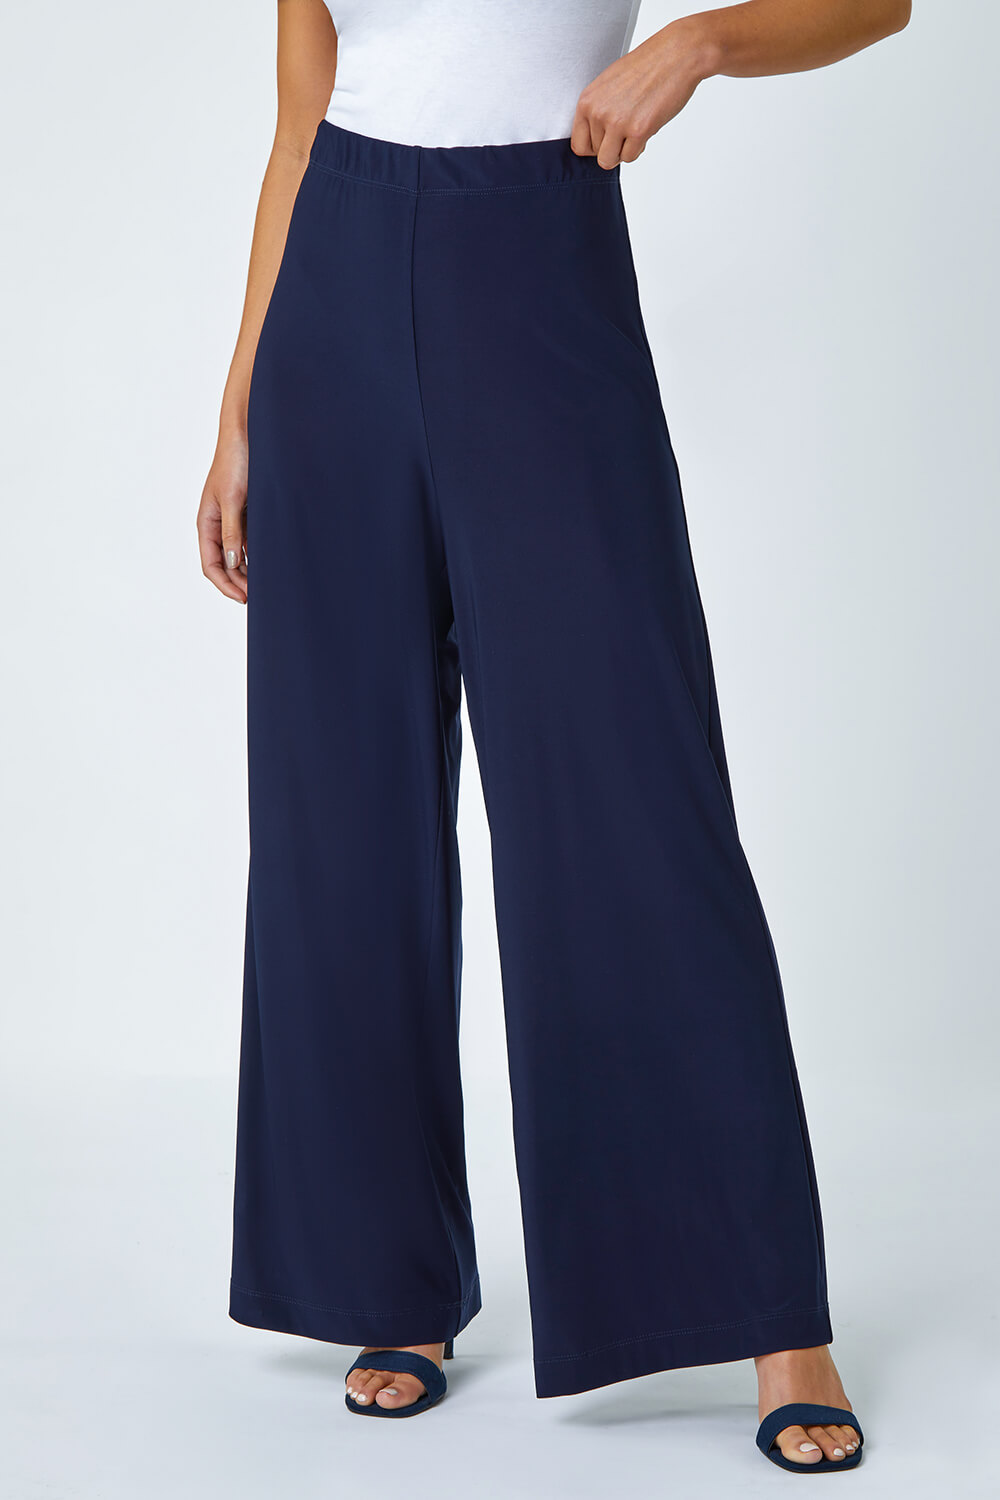  Petite Wide Leg Stretch Trouser, Image 4 of 5